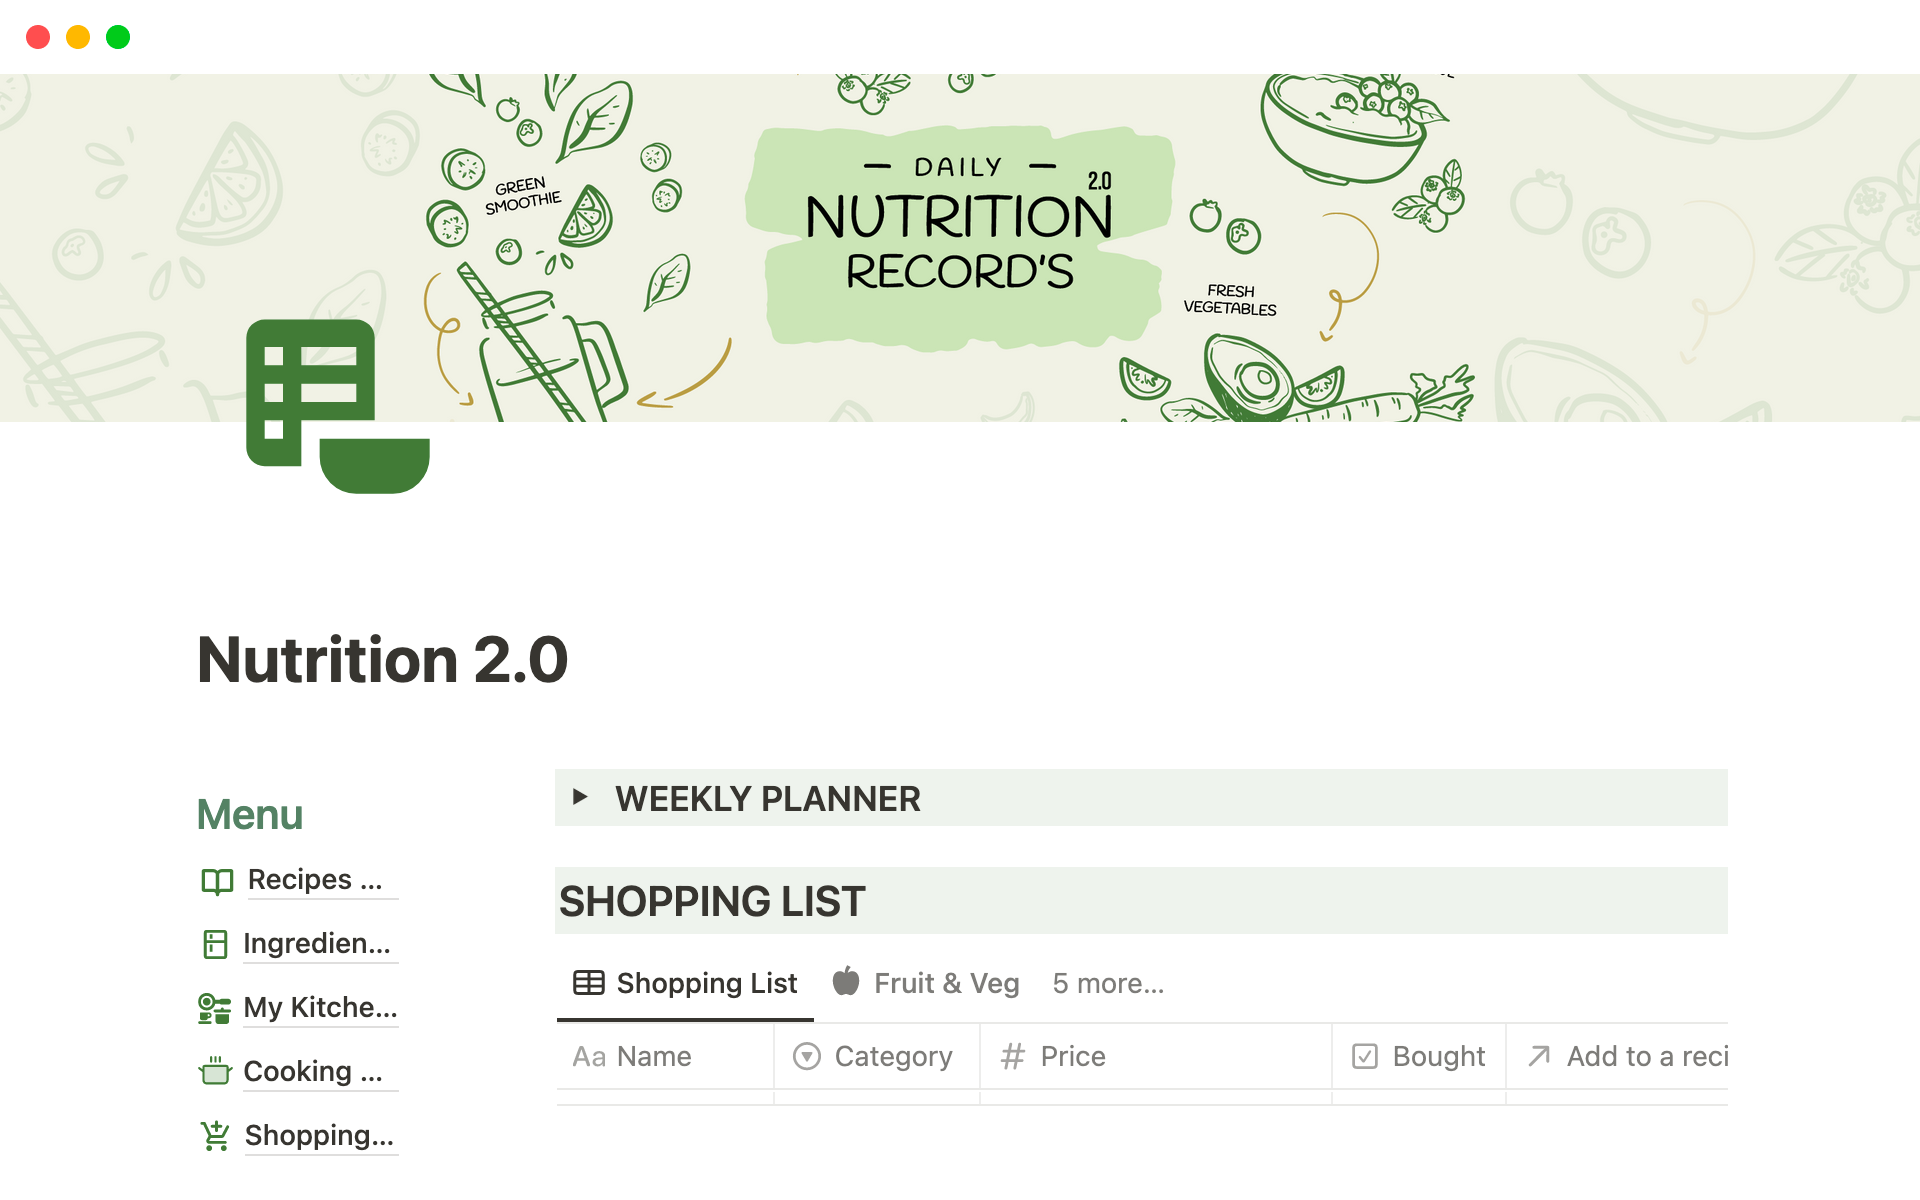 For those seeking the pinnacle of meal planning, Nutrition 2.0 presents an all-encompassing package.